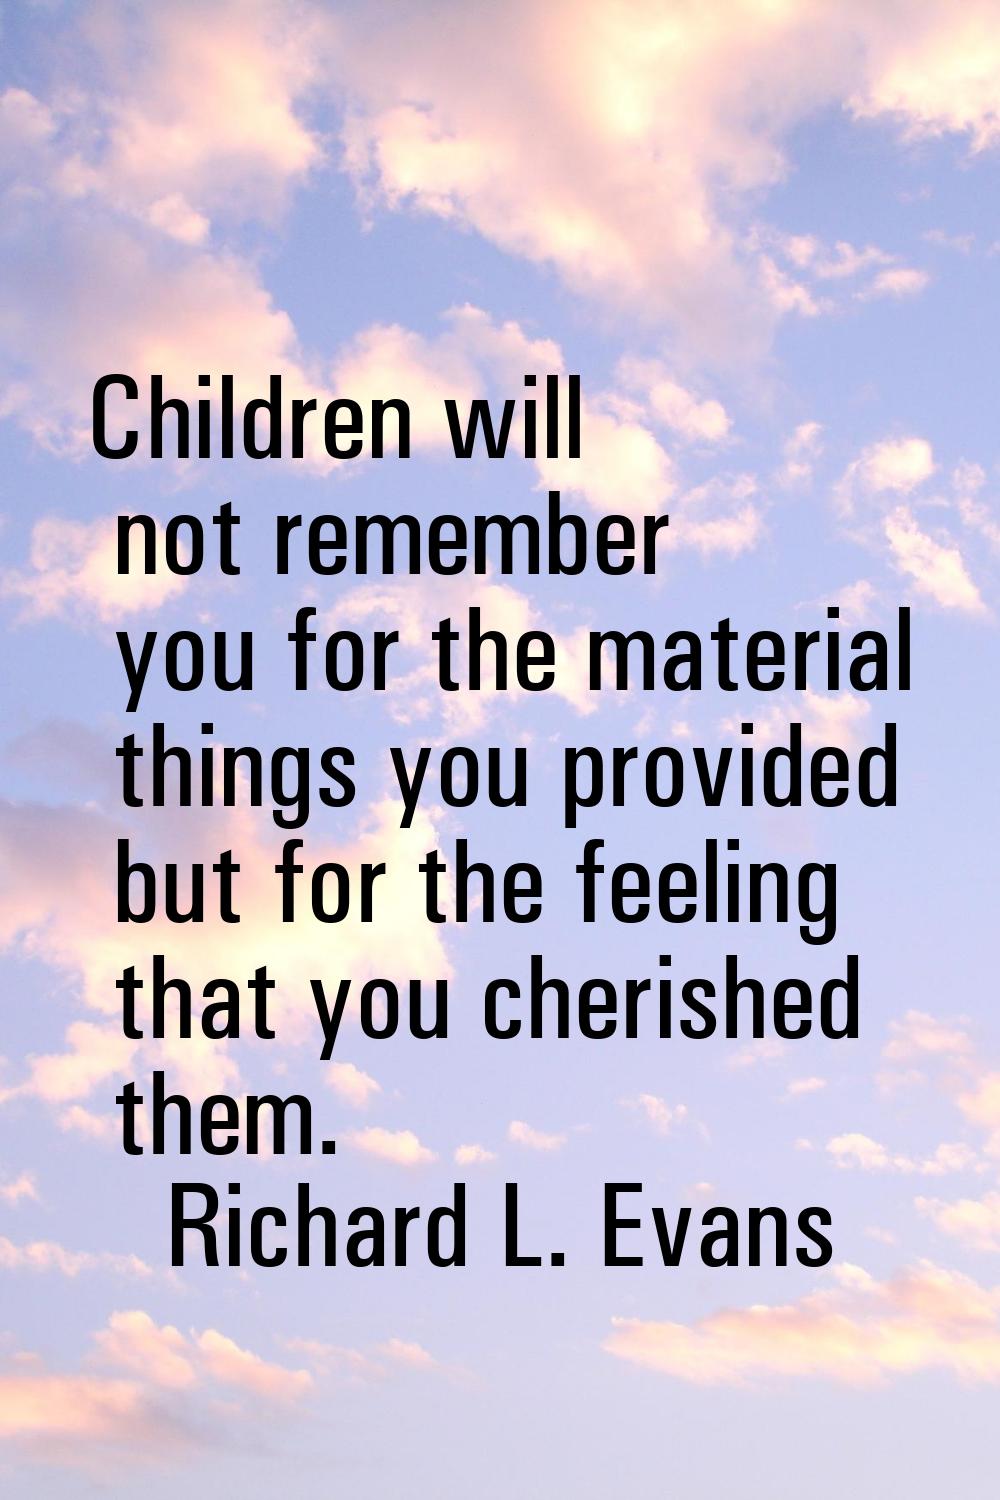 Children will not remember you for the material things you provided but for the feeling that you ch